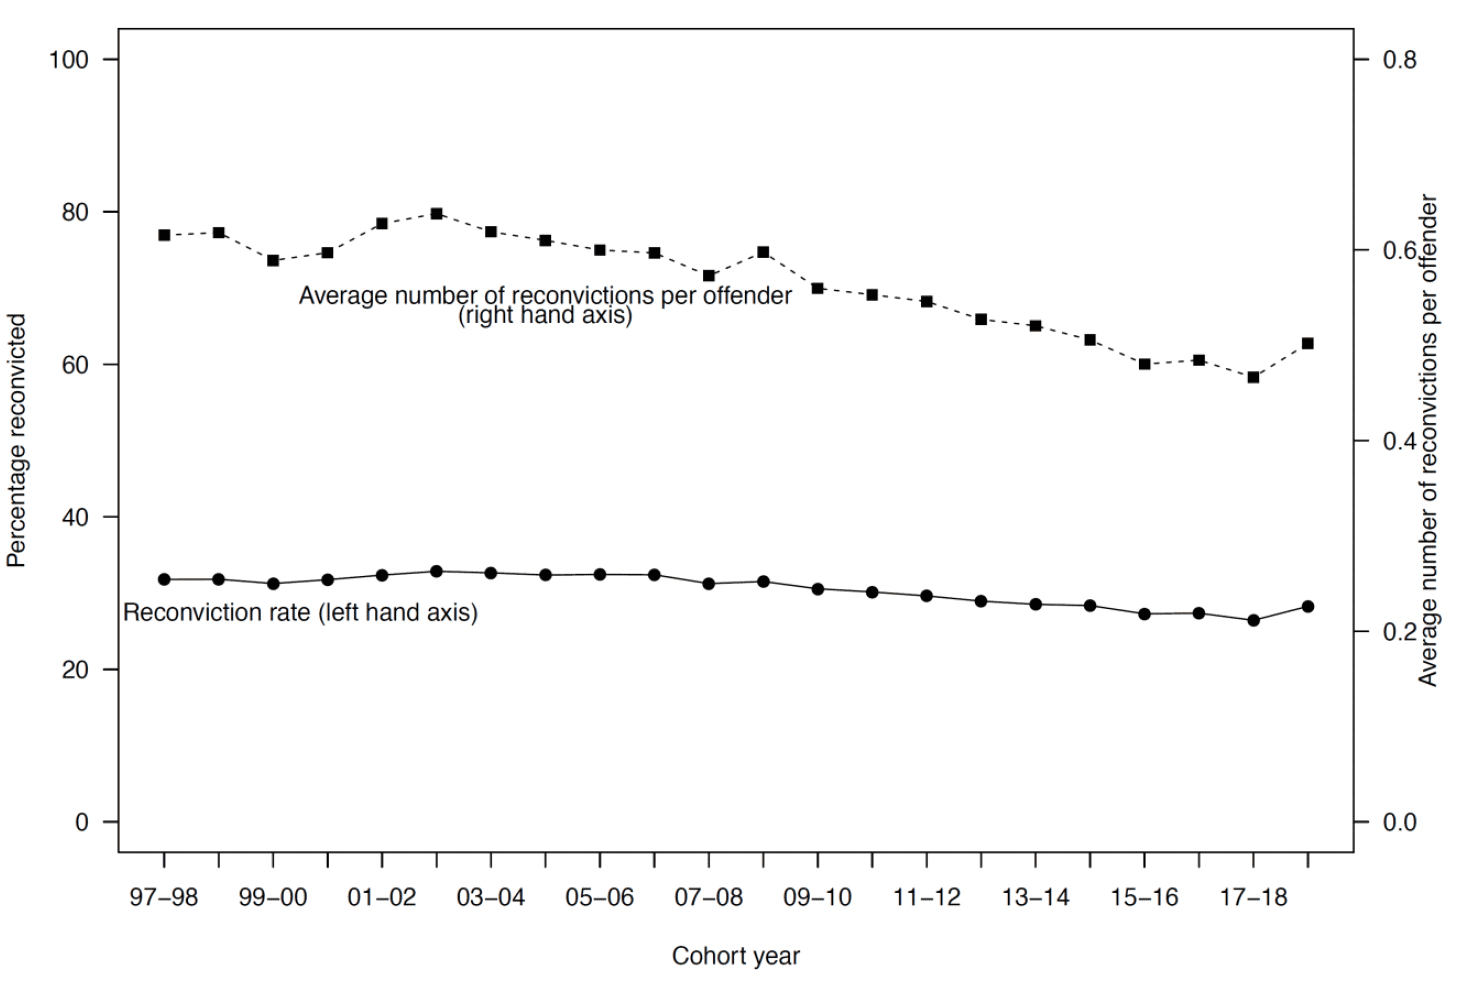 Chart showing the trend in reconviction rate and average number of reconvictions between 1997-98 to 2018-19